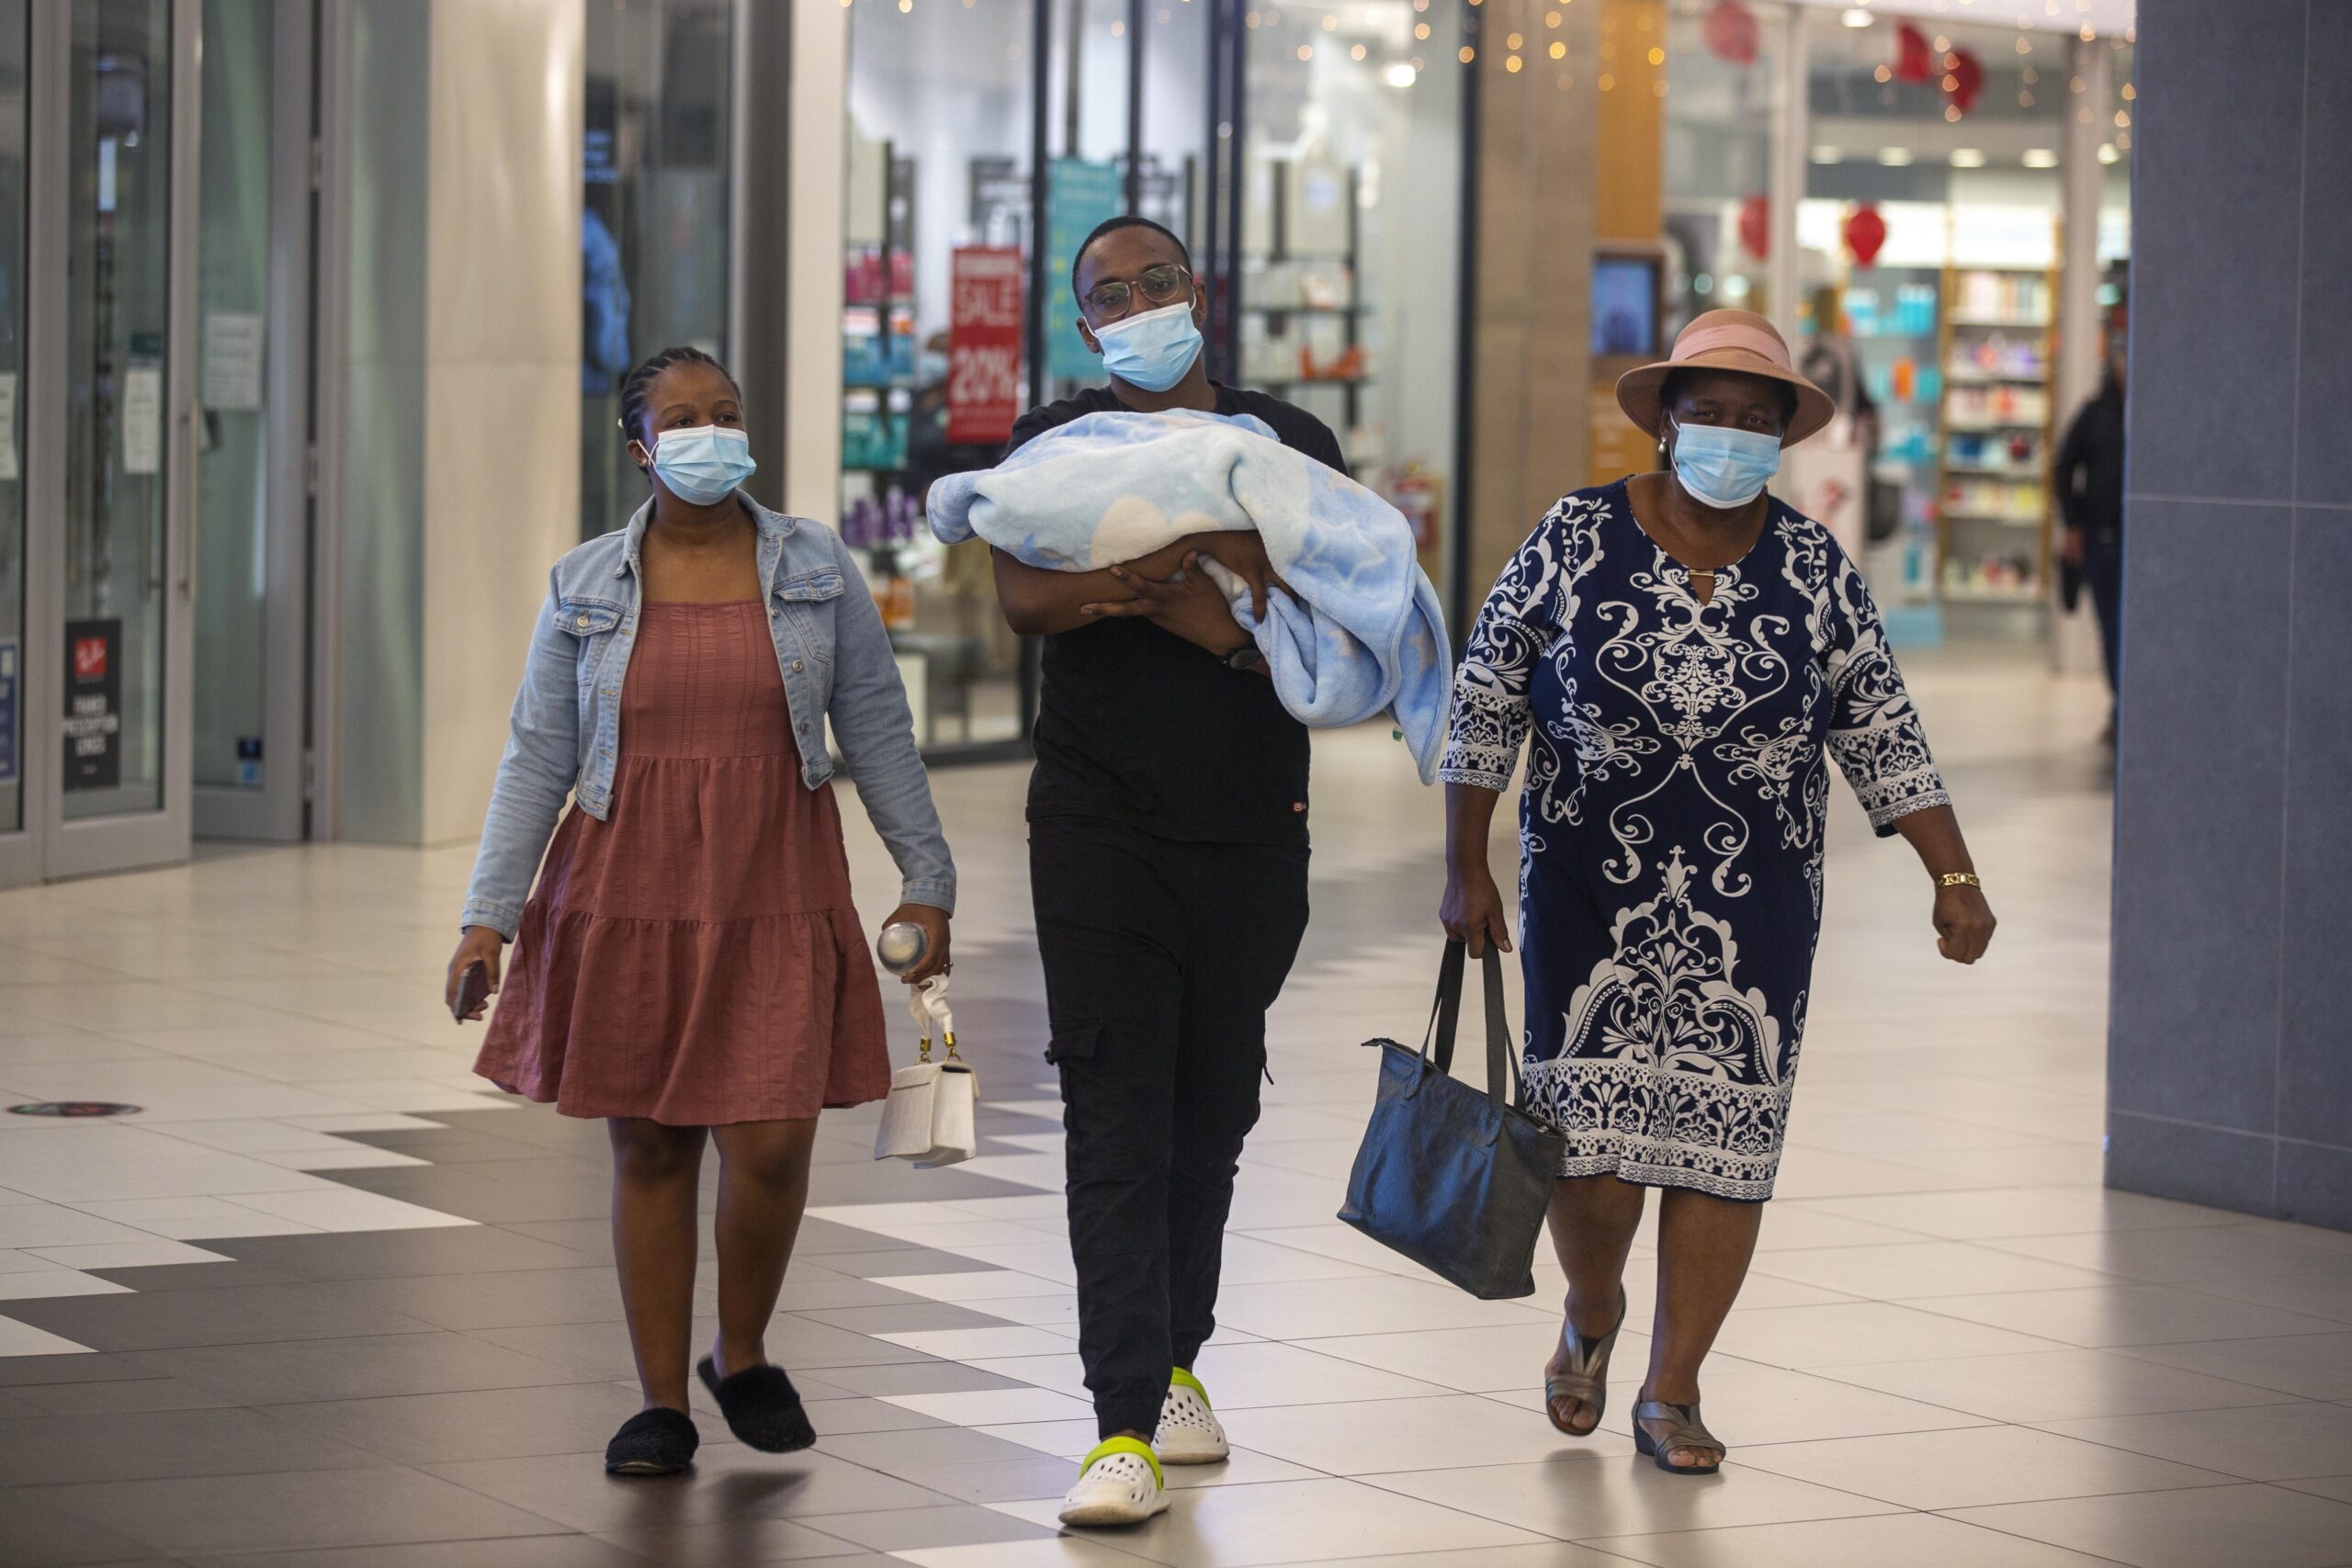 People with masks walk at a shopping mall in Johannesburg, South Africa, Friday Nov. 26, 2021. Advisers to the World Health Organization are holding a special session Friday to flesh out information about a worrying new variant of the coronavirus that has emerged in South Africa, though its impact on COVID-19 vaccines may not be known for weeks. (AP Photo/Denis Farrell)